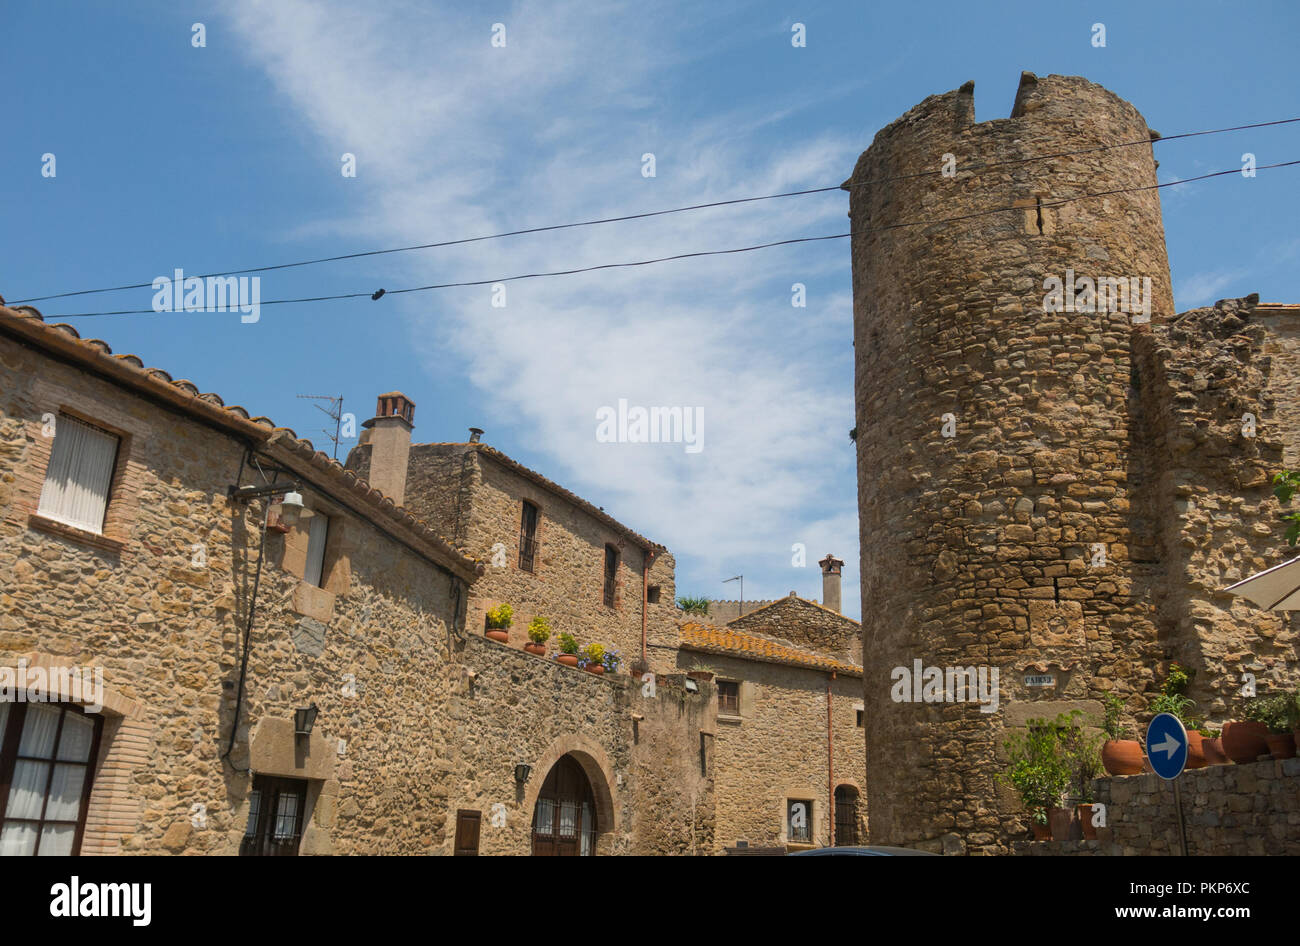 The tower of the medieval castle of Ullastret in the heart of Costa Brava. Baix Emporda, Catalonia, Spain. Stock Photo